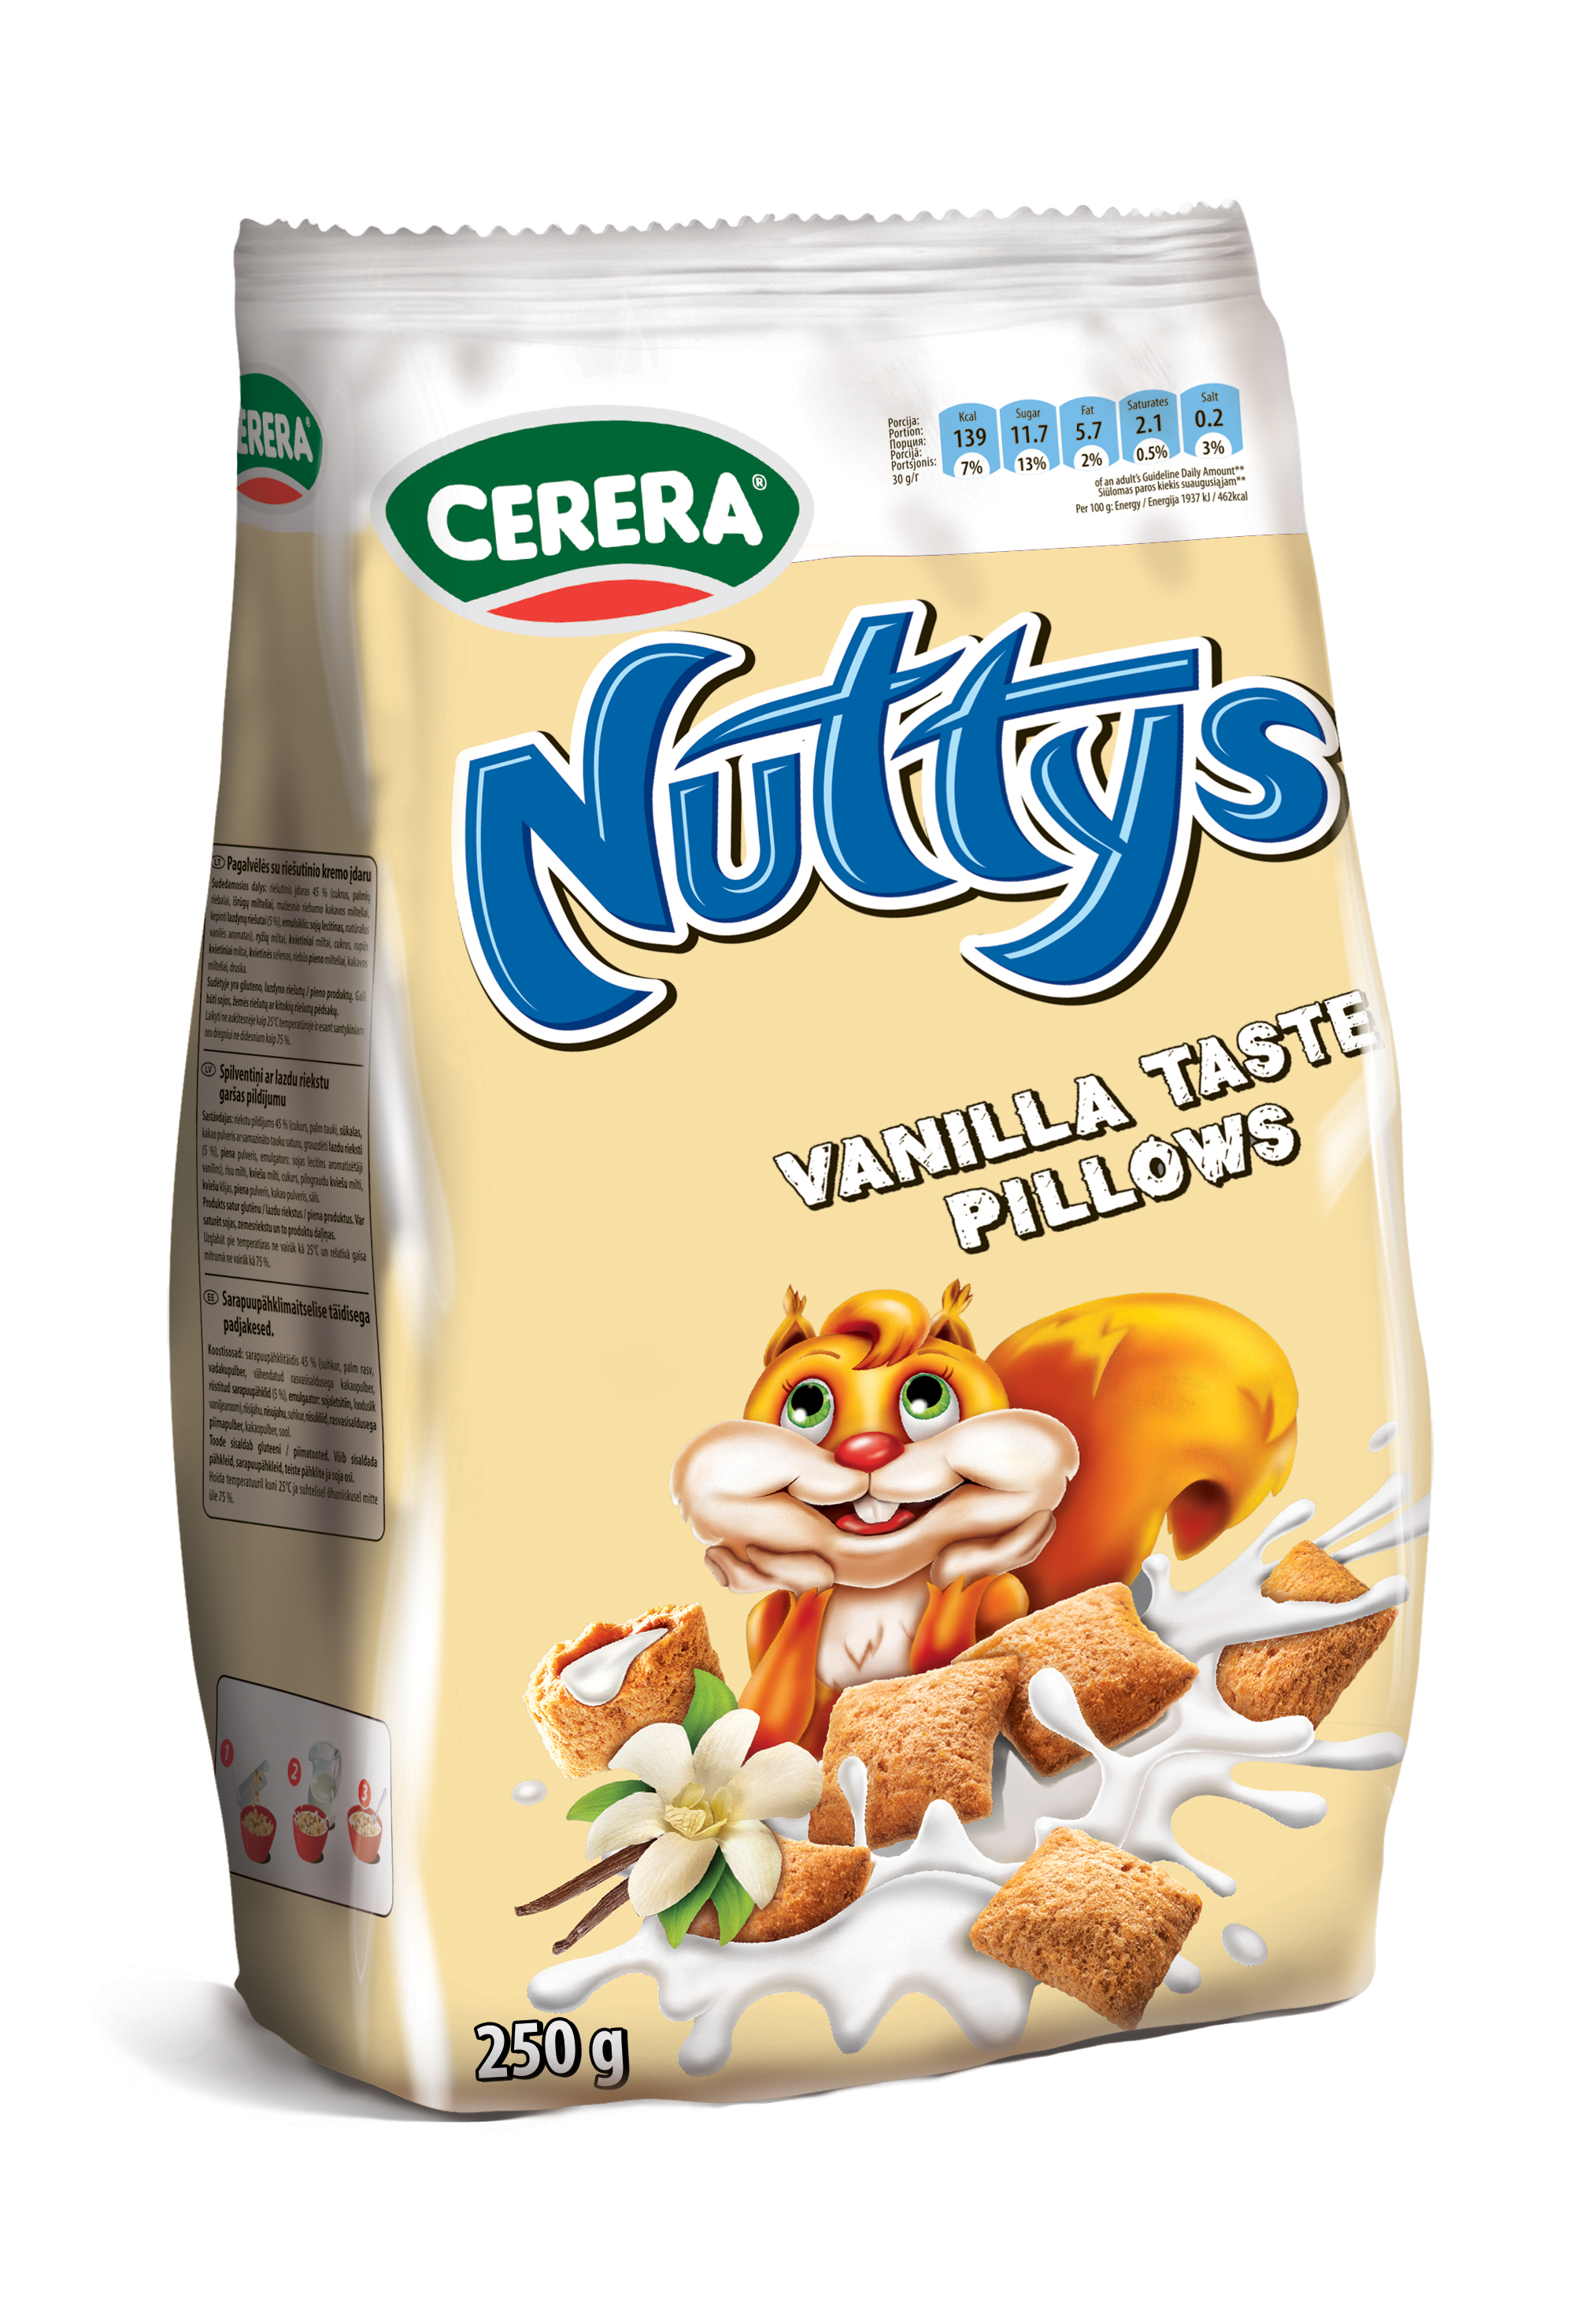 nuttys businessowner businessgrowth business management realestate markets innovation technology breakfast cereal manufacture tasty food cerera foods shape form taste color chocolate balls pillows shells corn flakes rings brand private label choco honey cookie sticks puffs puffed lithuania manufactory vanilla hazelnut cinamonn rice wheat cereo fruity hoops fruit production line company supply snack snacks retail wholesale distribution import